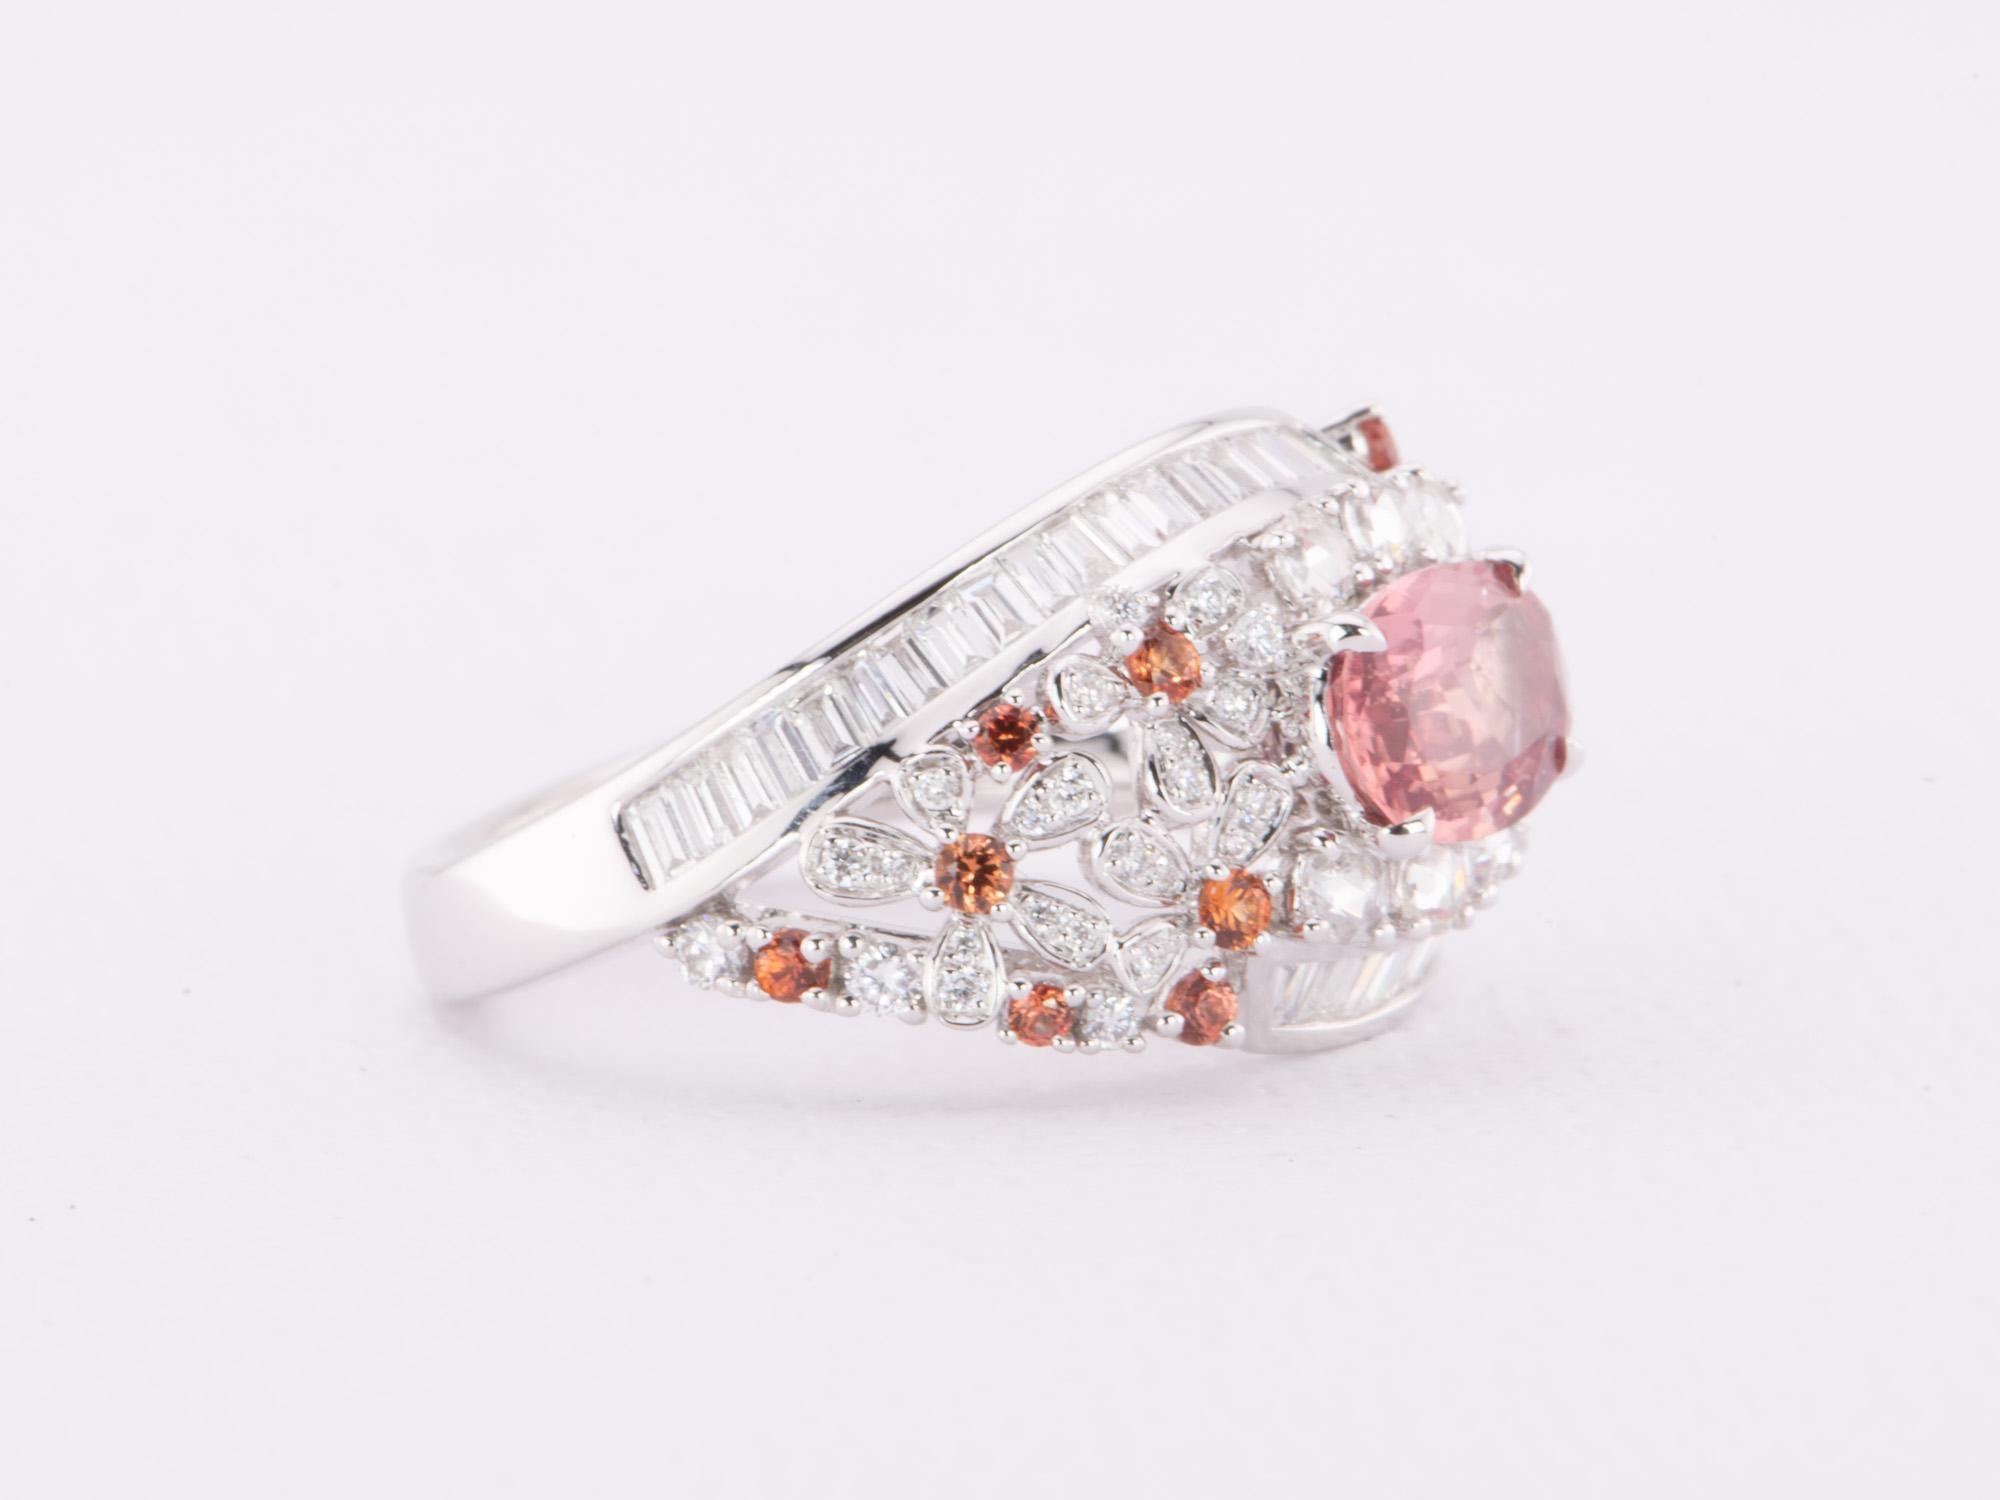 Uncut 1.12ct Natural Padparadscha Sapphire Diamond Cluster Ring 18K White Gold R6616 For Sale